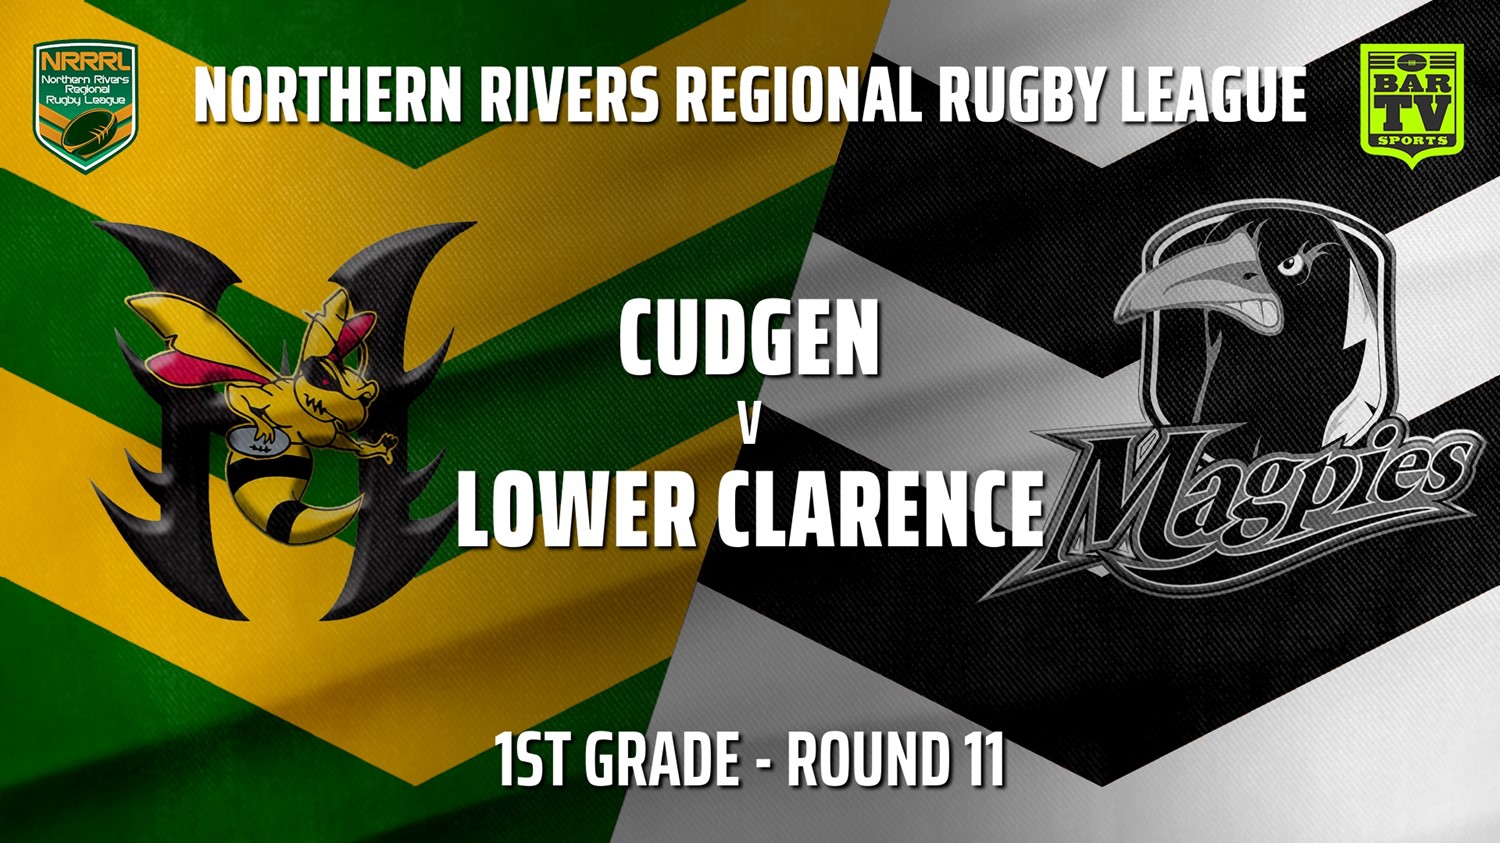 210718-Northern Rivers Round 11 - 1st Grade - Cudgen Hornets v Lower Clarence Magpies Slate Image